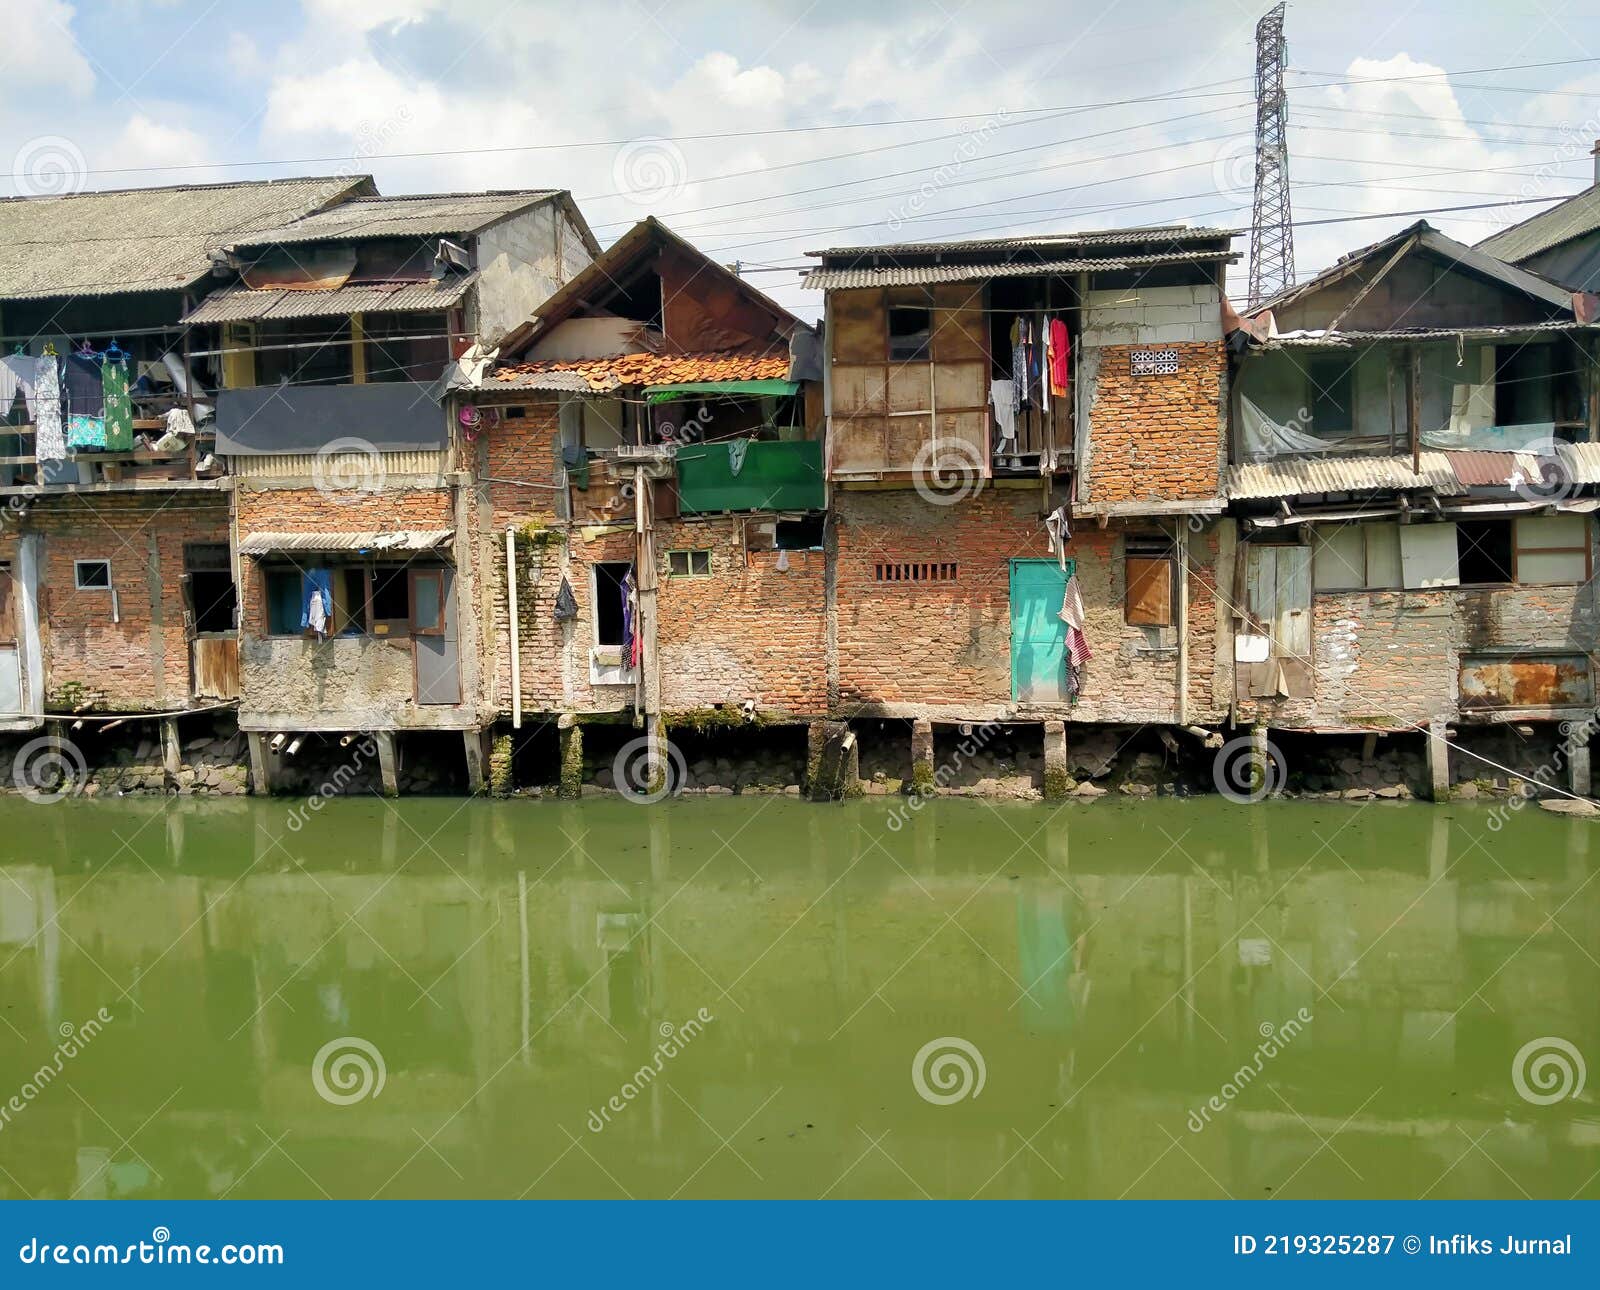 1 971 Jakarta House Photos Free Royalty Free Stock Photos From Dreamstime